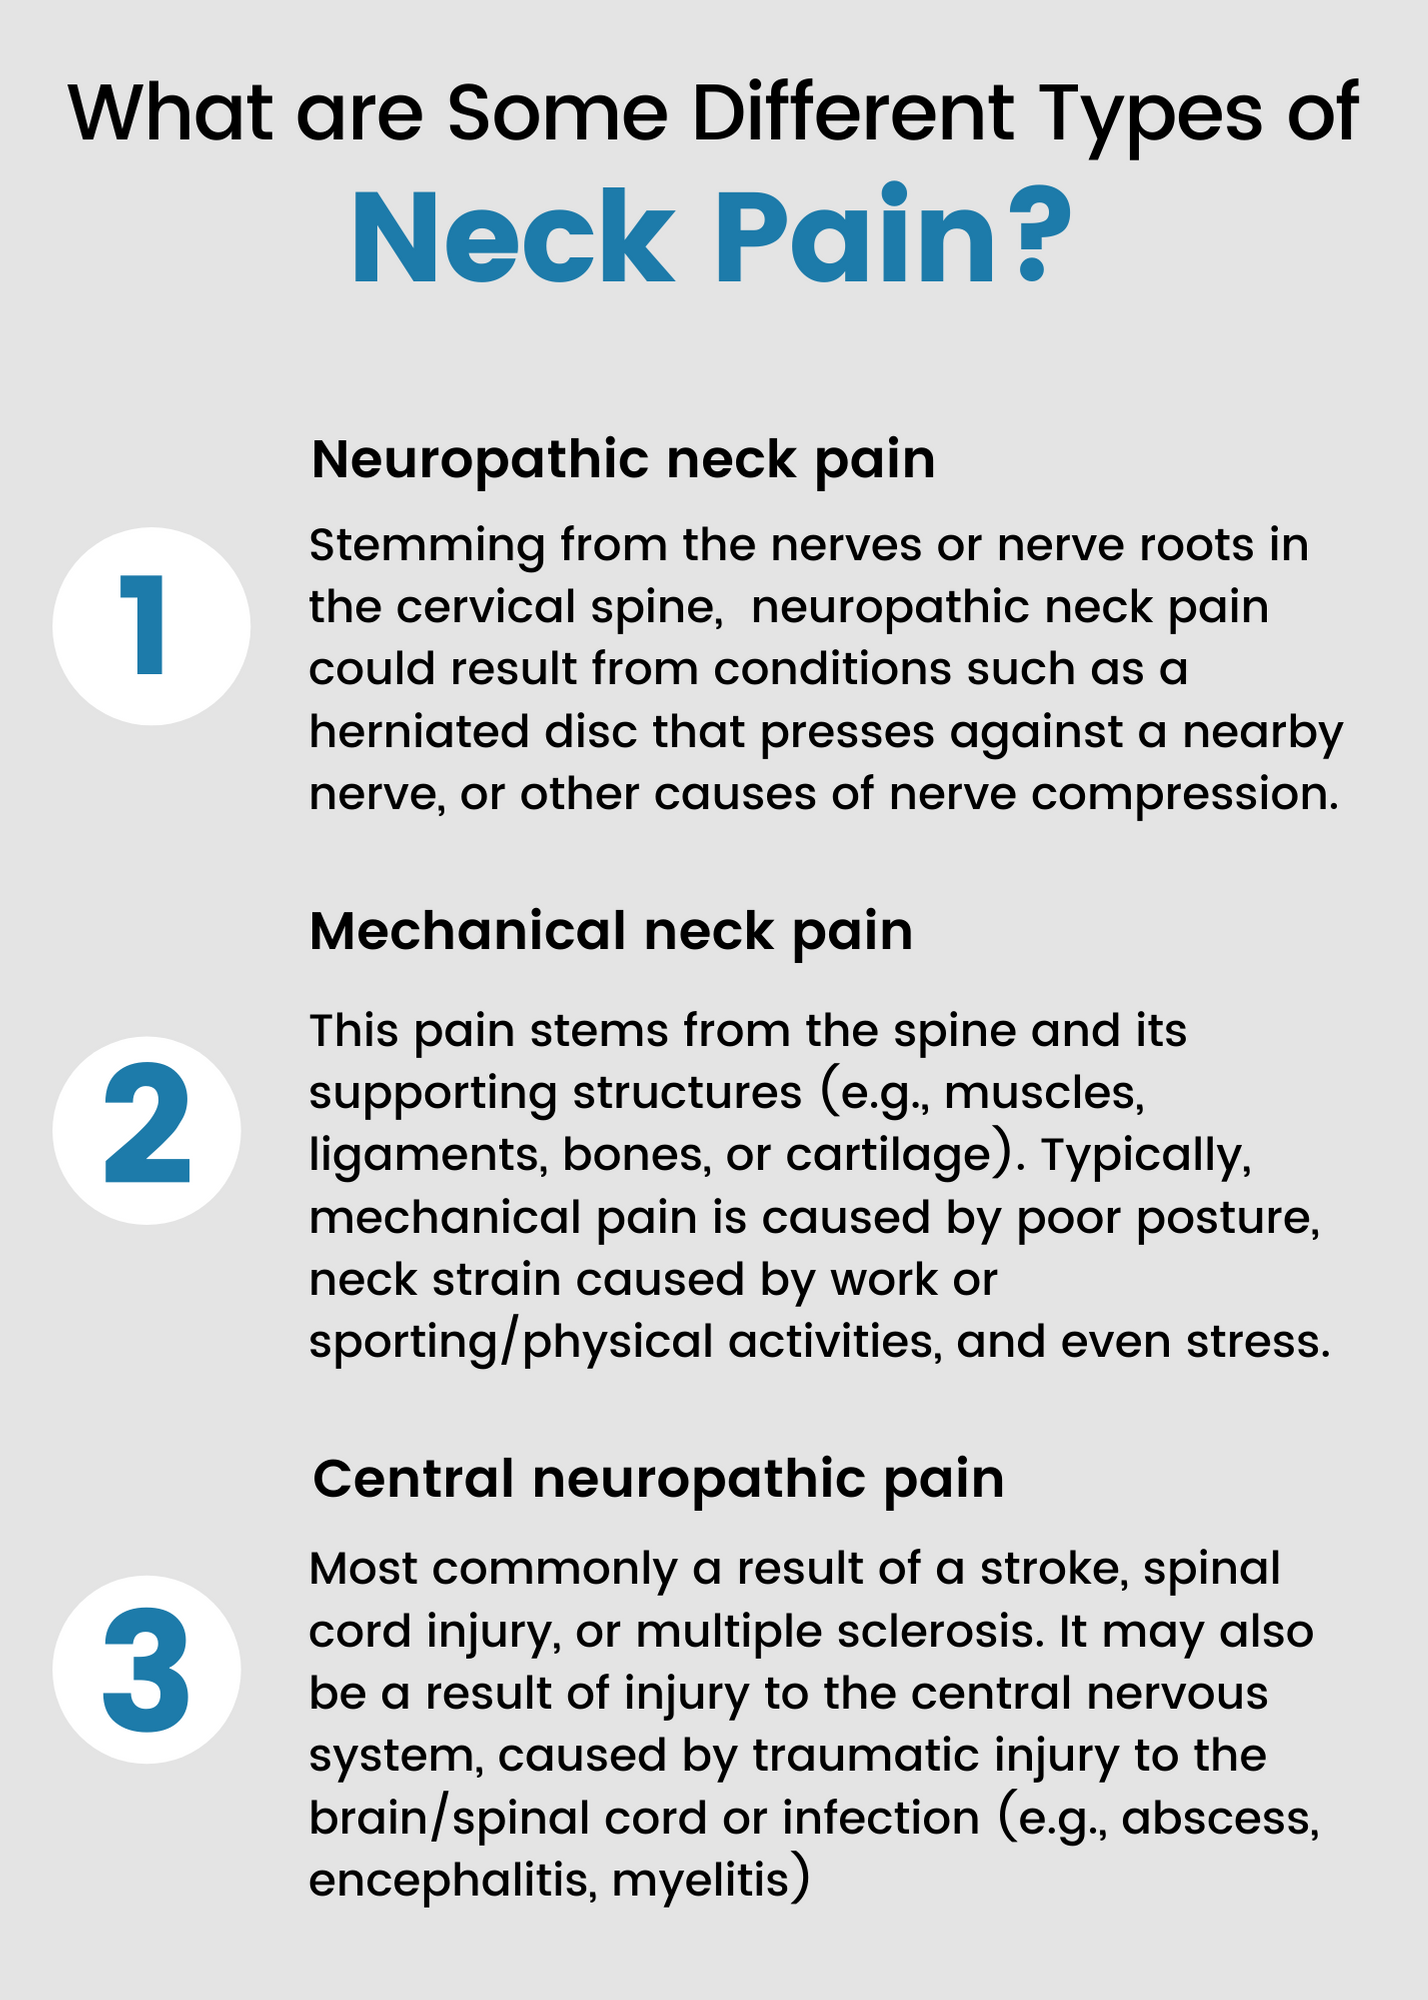 Neck pain: treatment, causes and danger signs